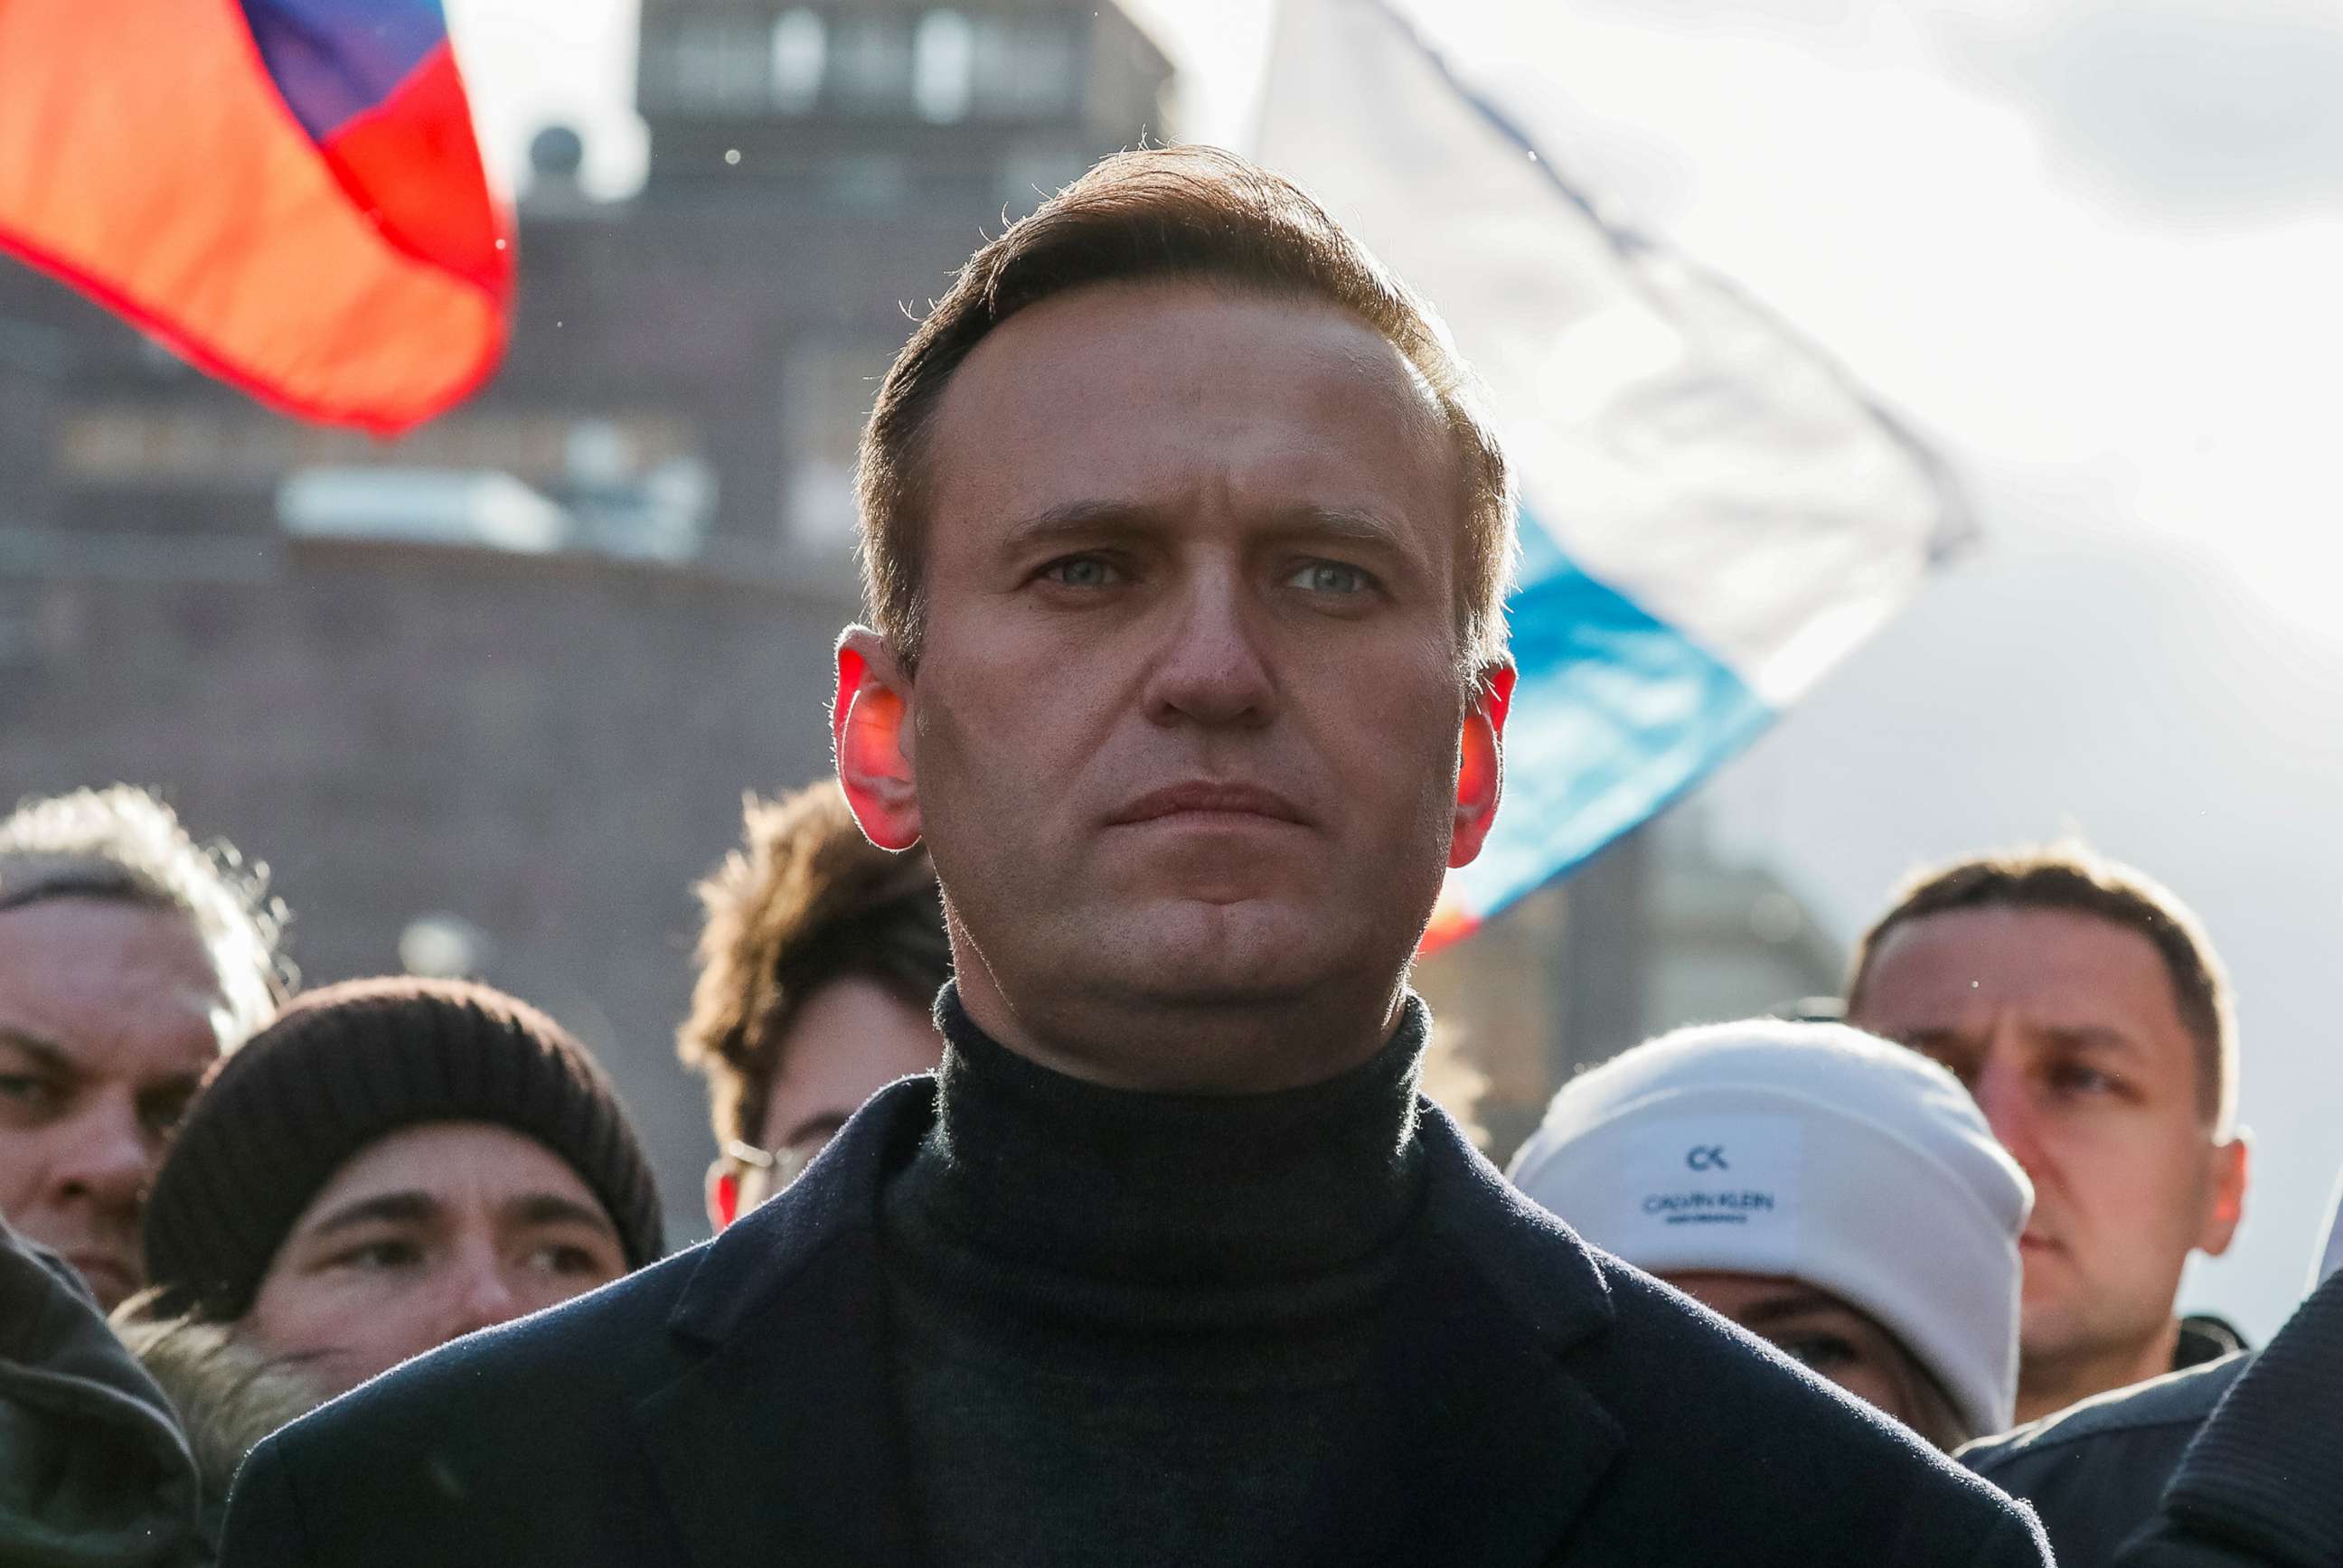 PHOTO: Russian opposition leader Alexei Navalny takes part in a rally in Moscow on Feb. 29, 2020.